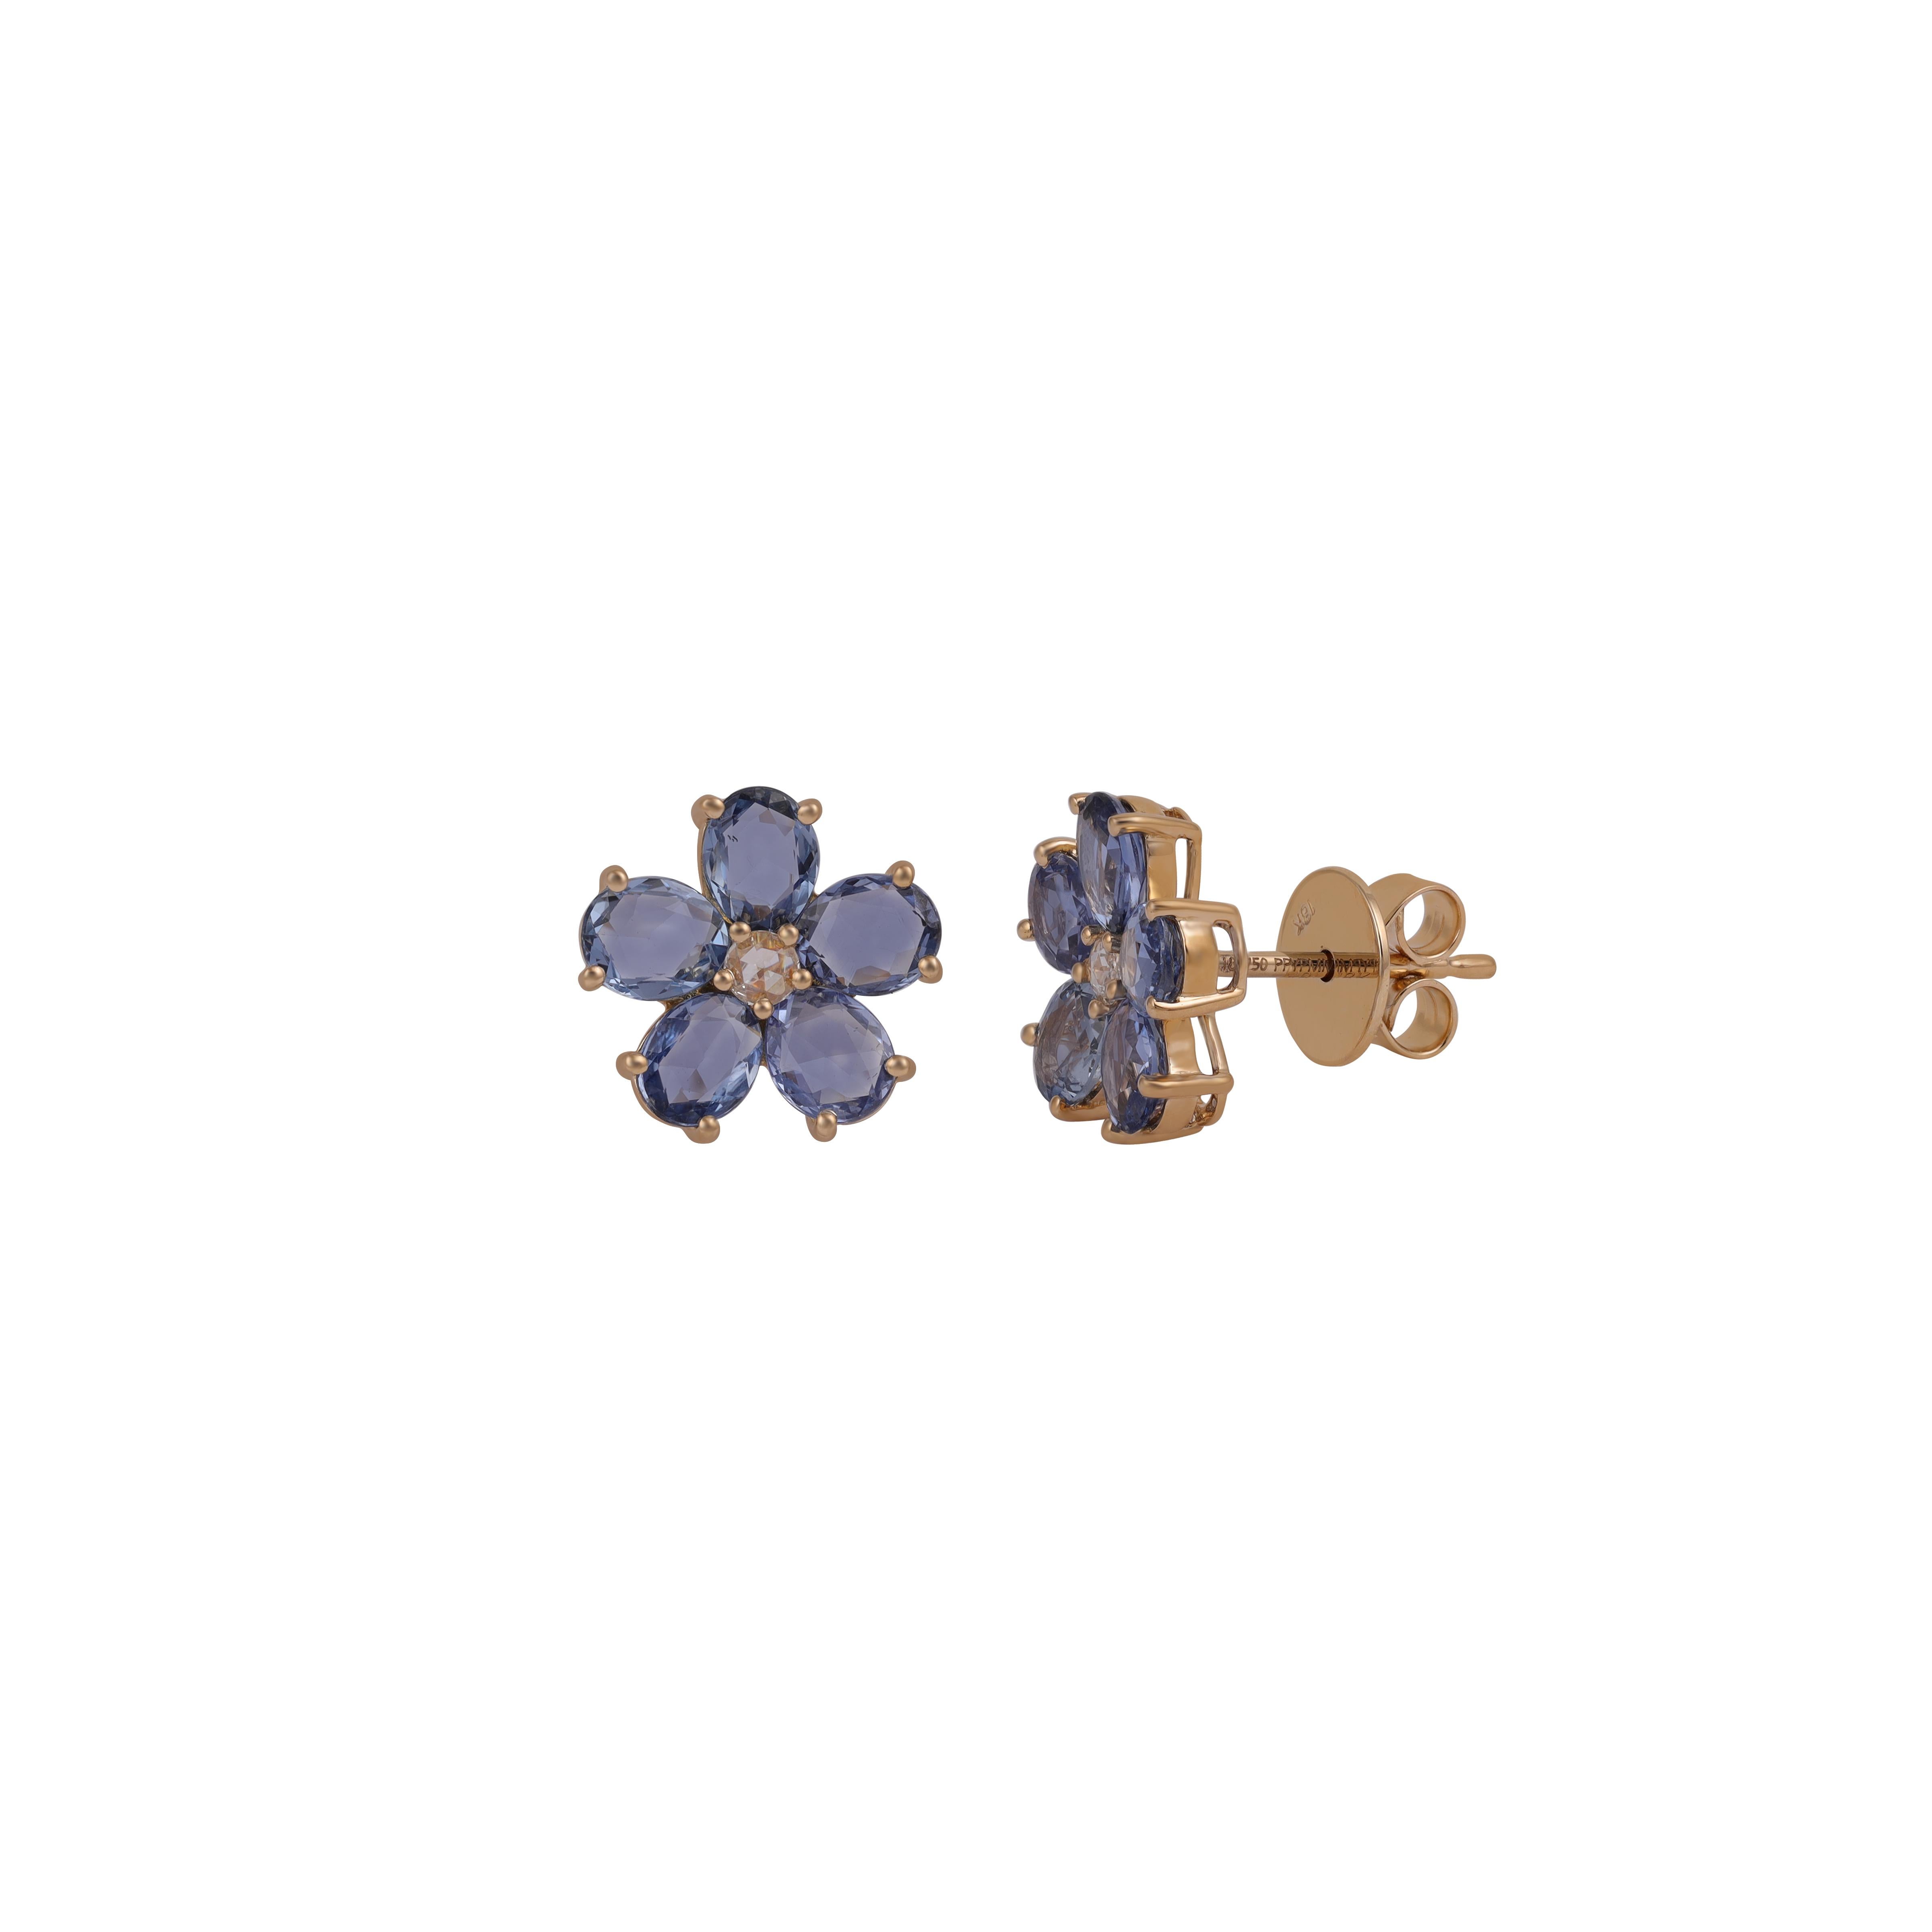 These are an elegant blue sapphire & diamond stud earrings studded in 18k yellow gold features 2 pieces of oval shaped blue sapphires weight 3.80 carats with diamonds weight 0.07 carats, This entire earring pair made of 18k yellow gold weight 3.23